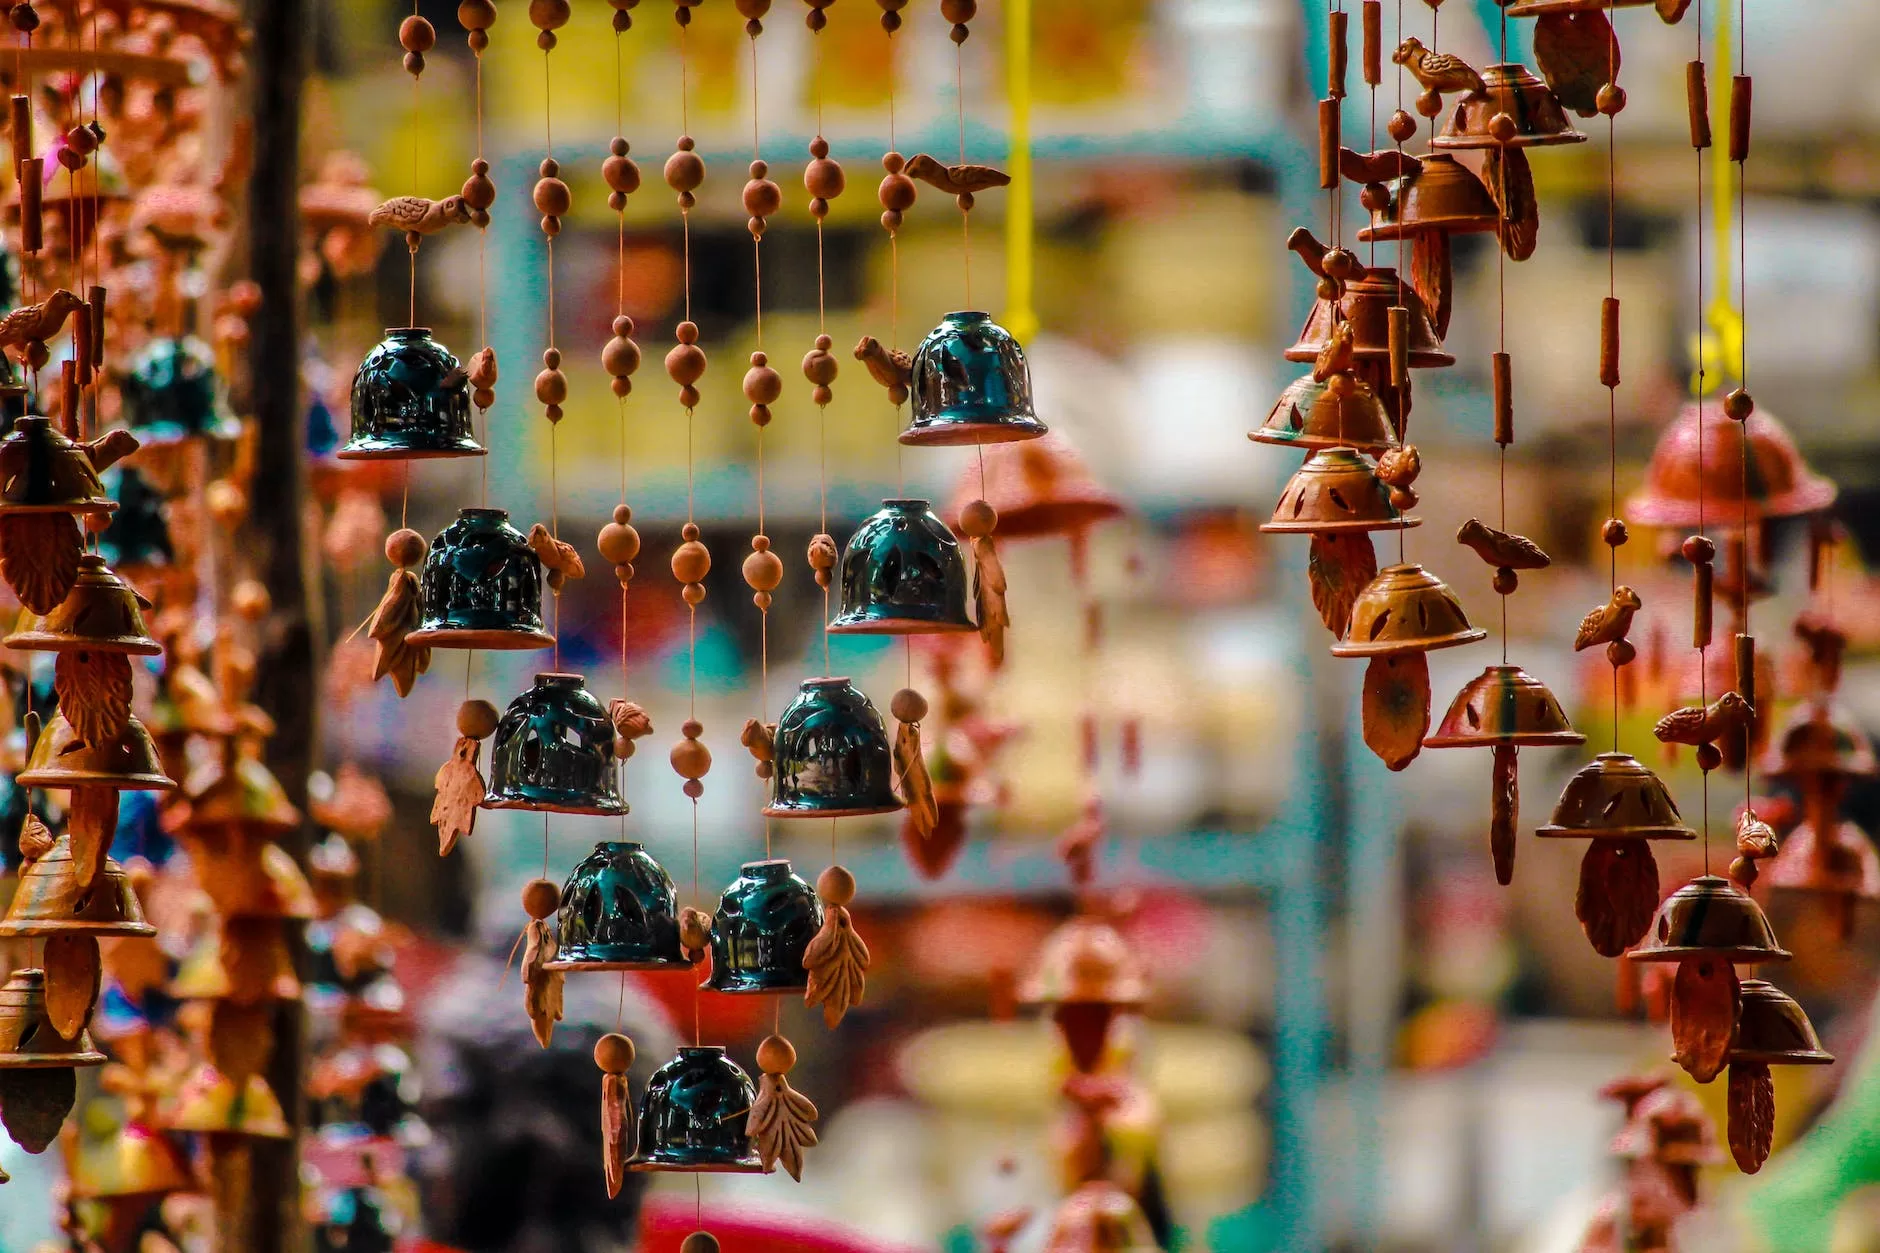 ornaments hanging for sale in market culture best travel tips